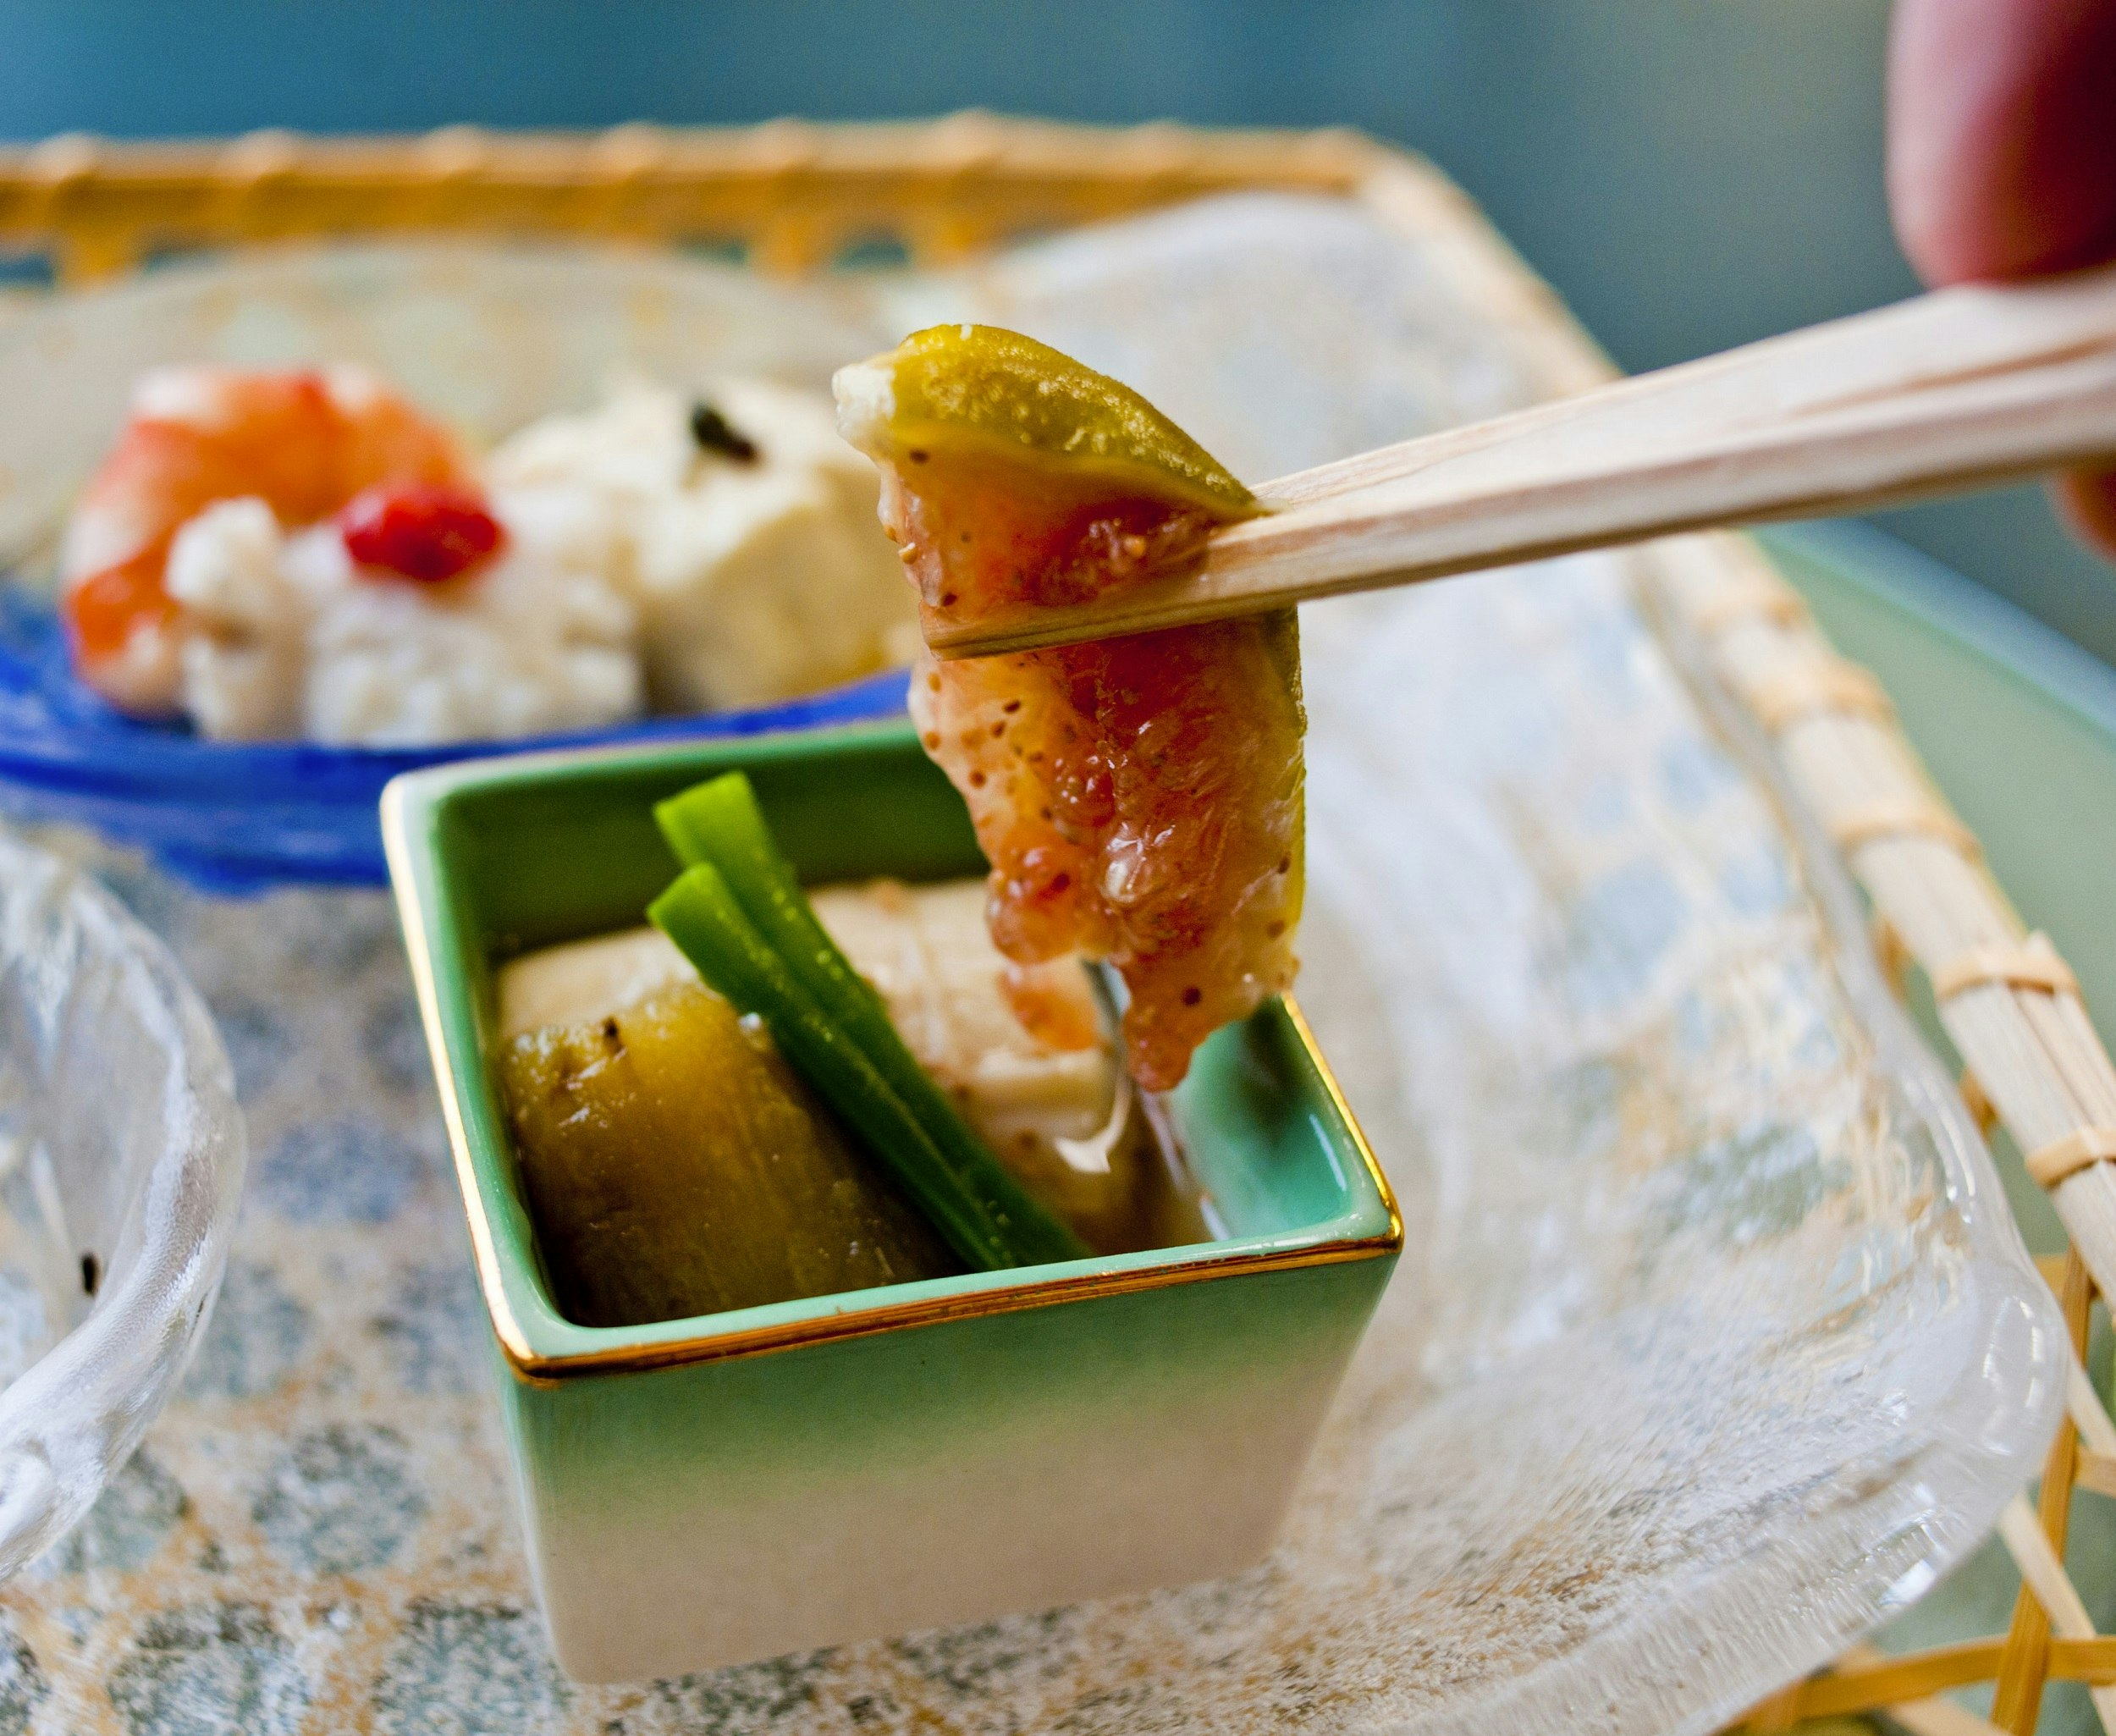 A set of chopsticks holds some traditional Buddhist cuisine, which sits in a small square bowl.